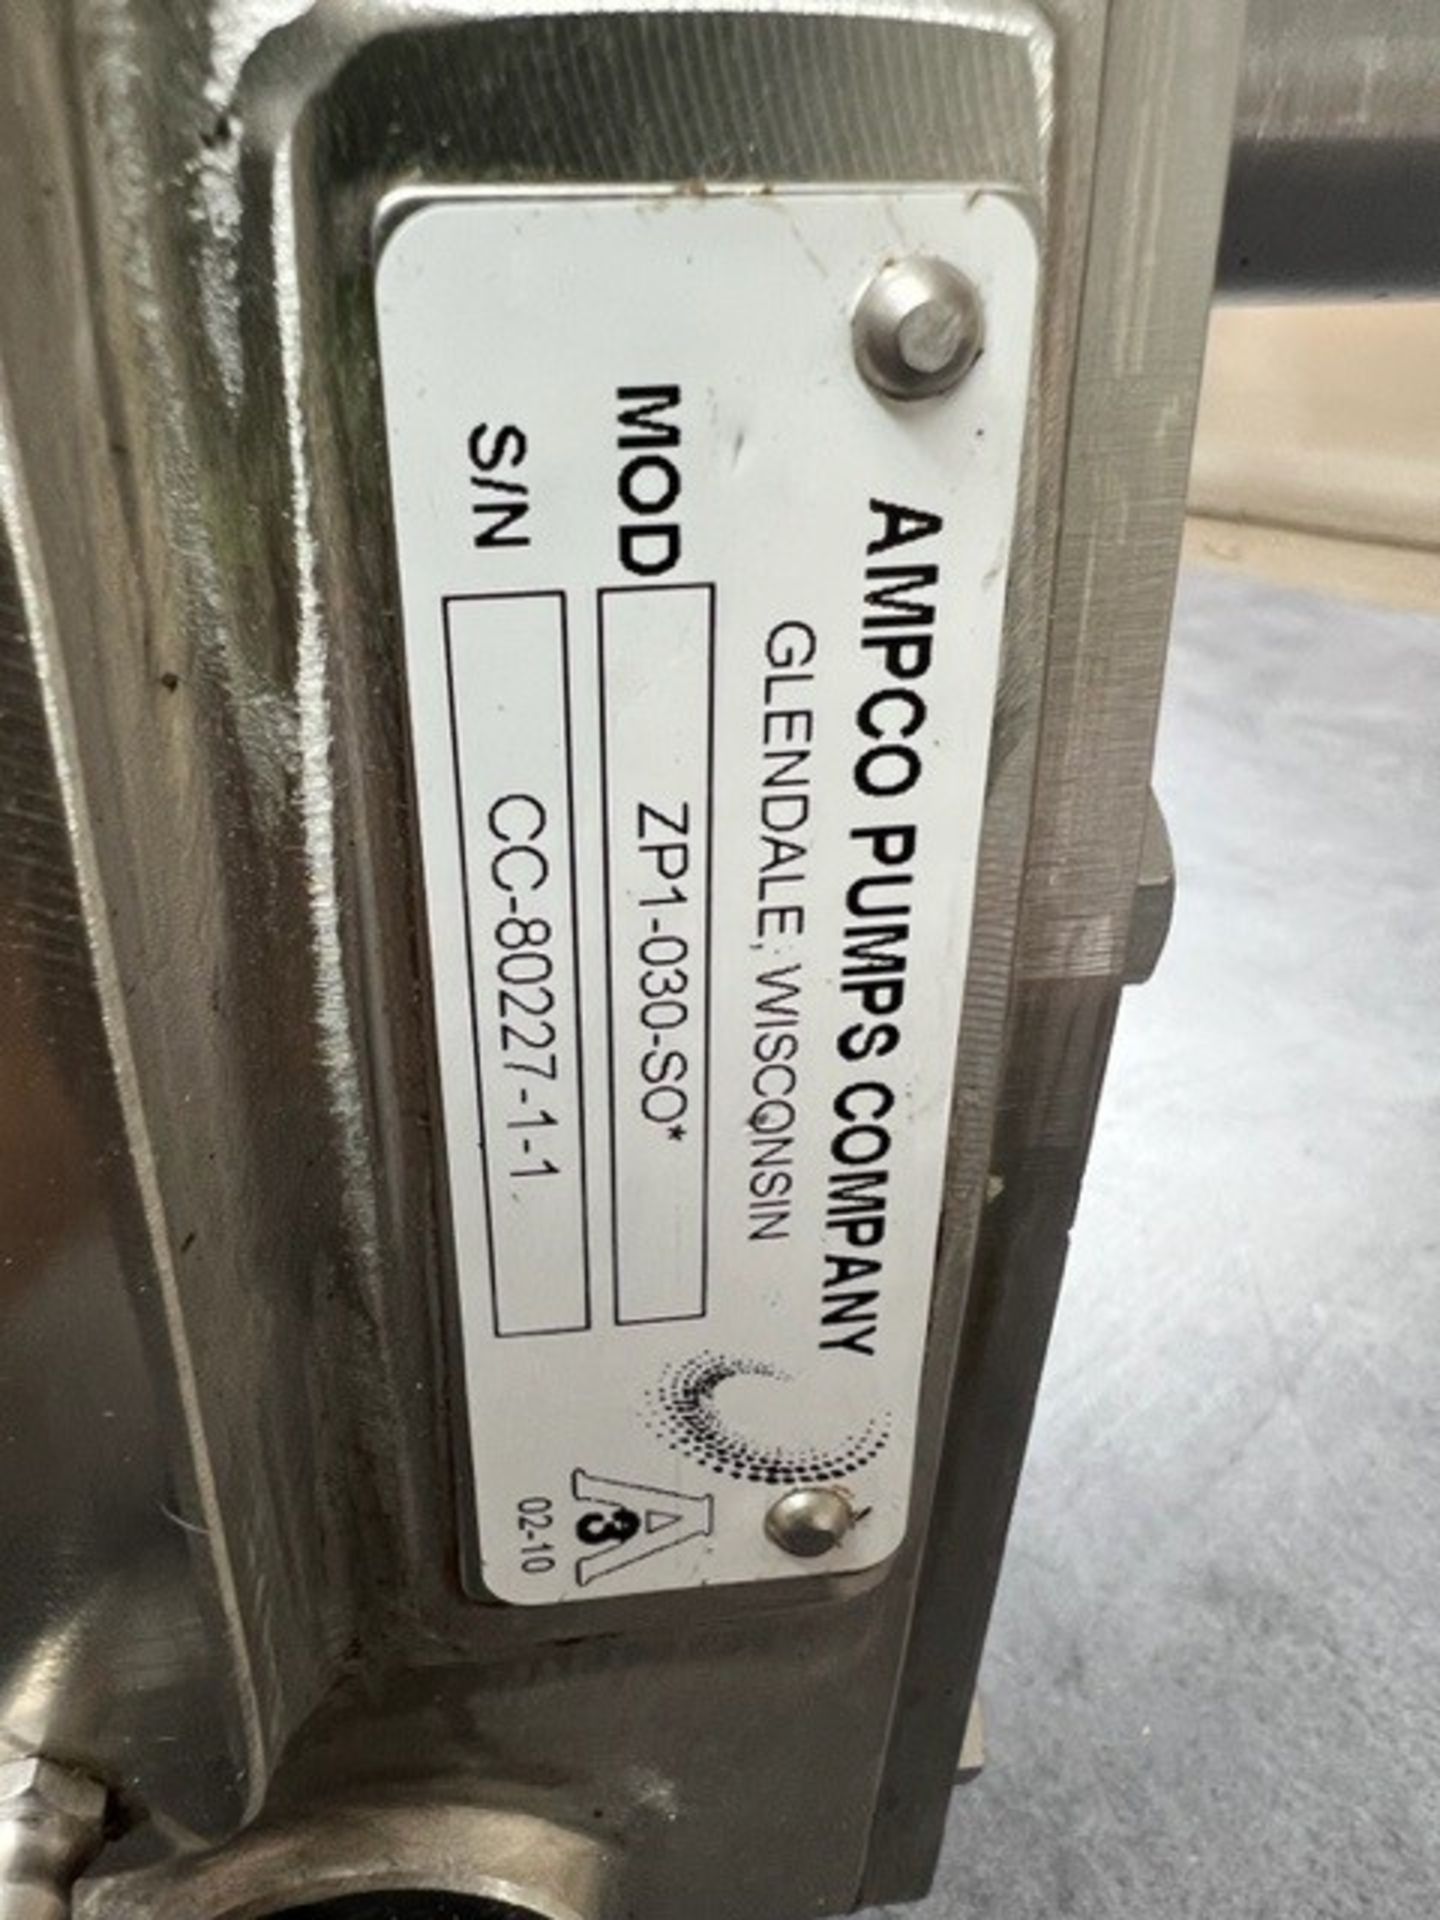 Ampco 1.5 inch Positive Pump, Model ZP1-030-SO*, S/N CC-80227-1-1 with Stainless Rotors, All - Image 6 of 6